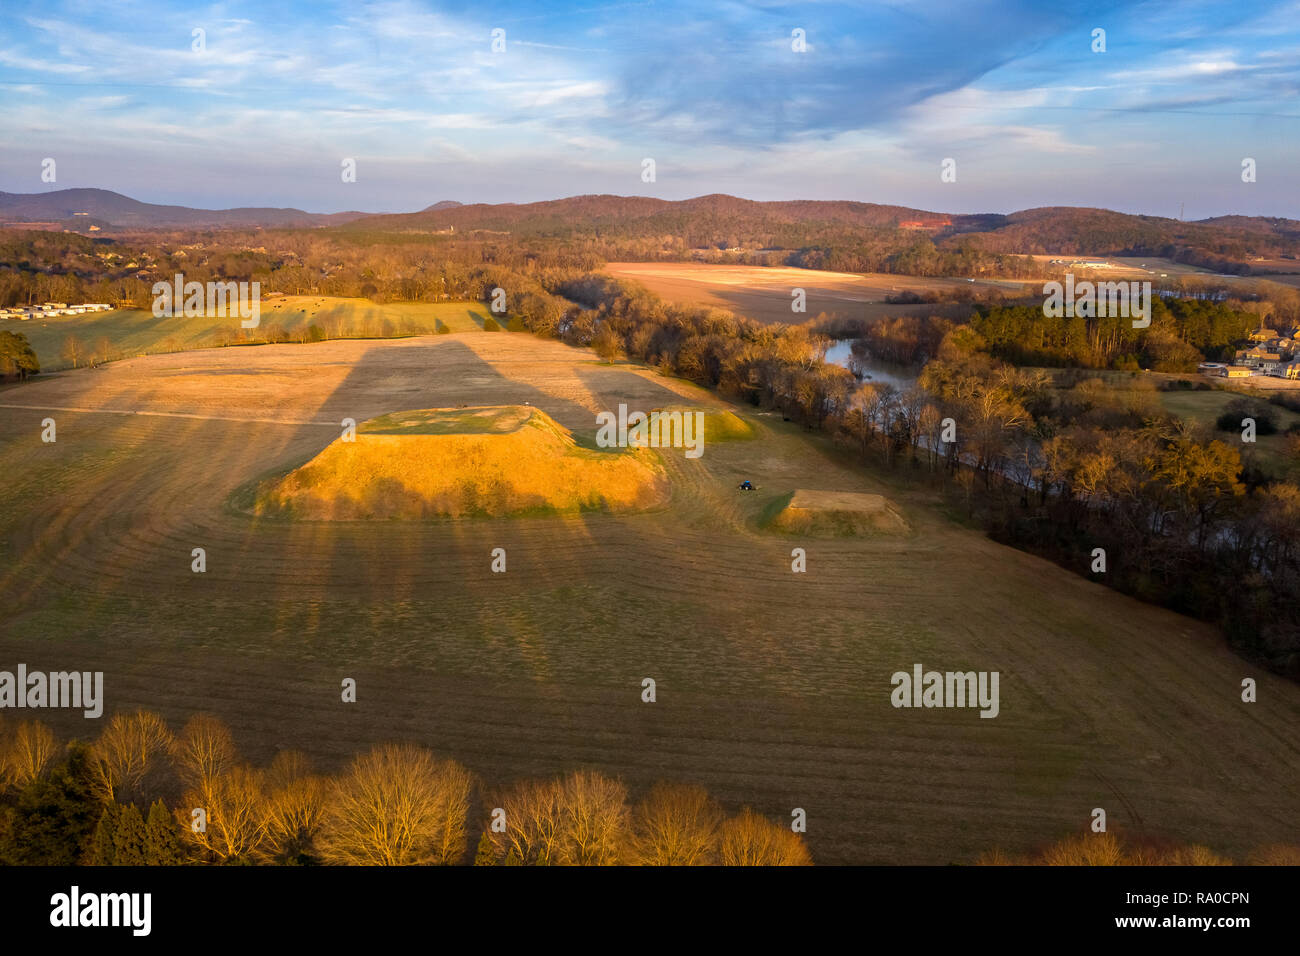 Aerial view of Etowah Indian Mounds Historic Site in Cartersville Georgia Stock Photo